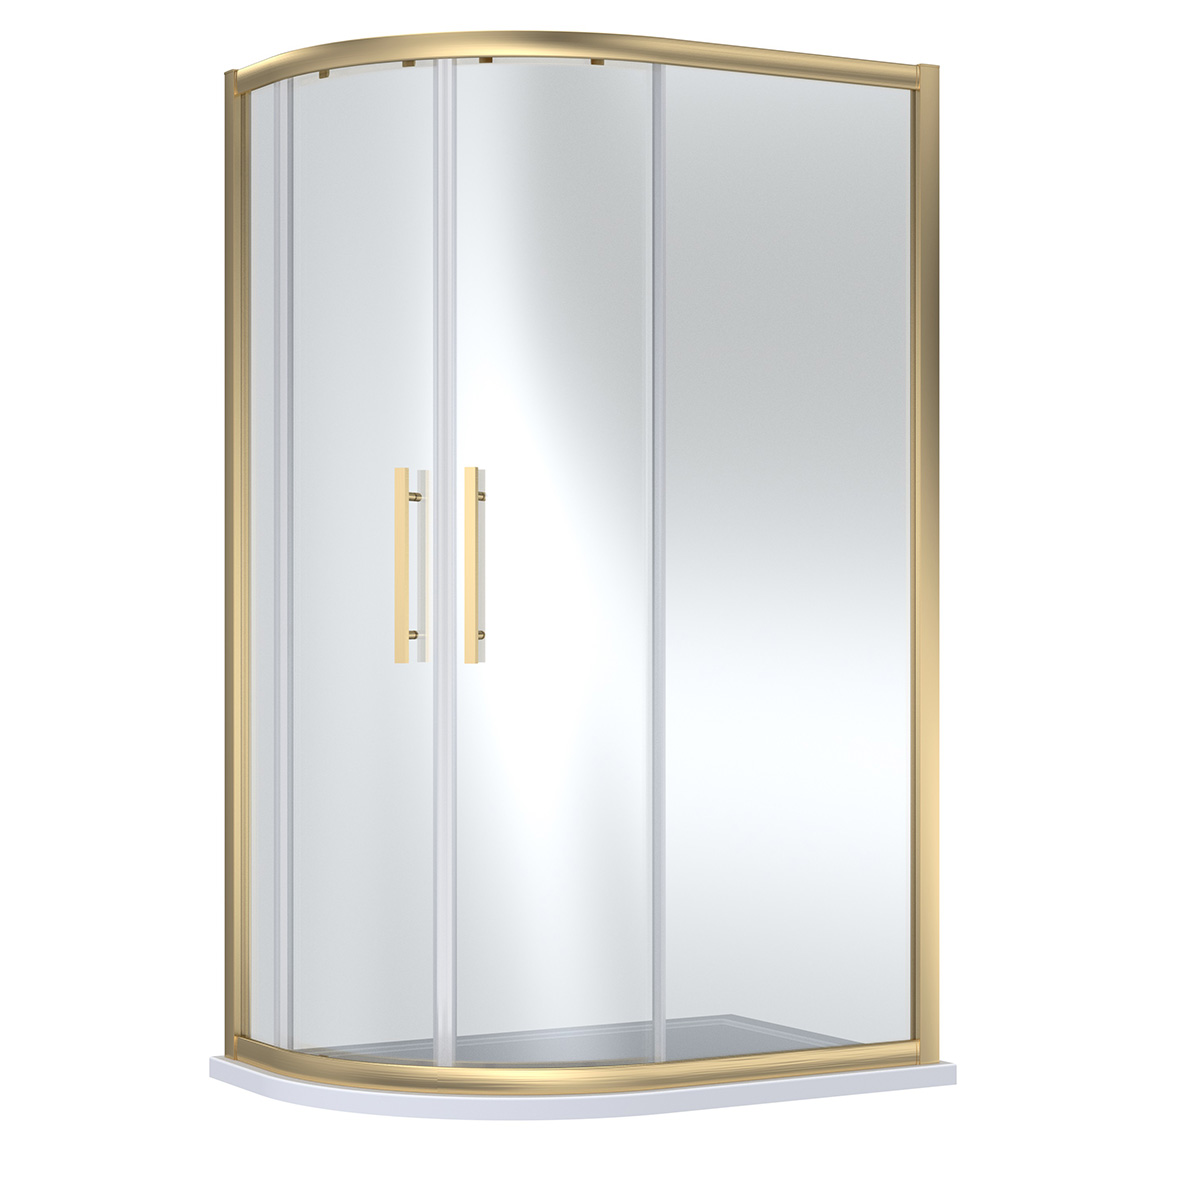 Hudson Reed 1000 x 800mm Offset Quadrant Shower Enclosure with Square Handle - Brushed Brass